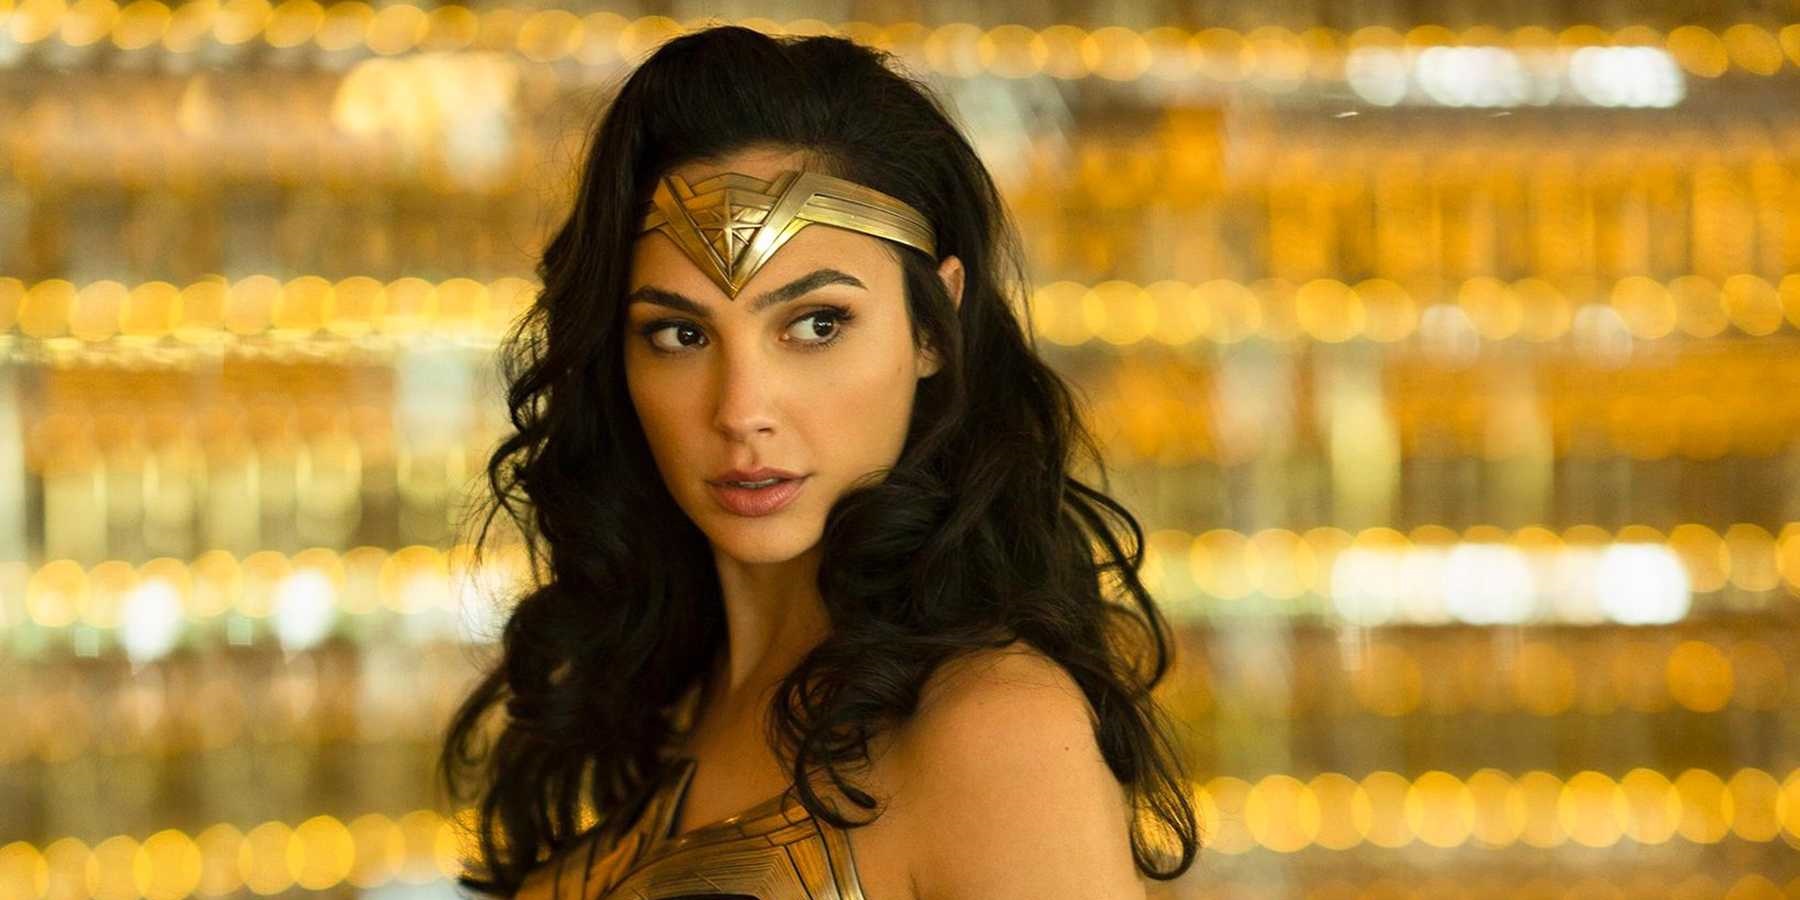 Watch: Trailer For Wonder Woman 1984 is Here & It is Absolutely Kick-Ass!